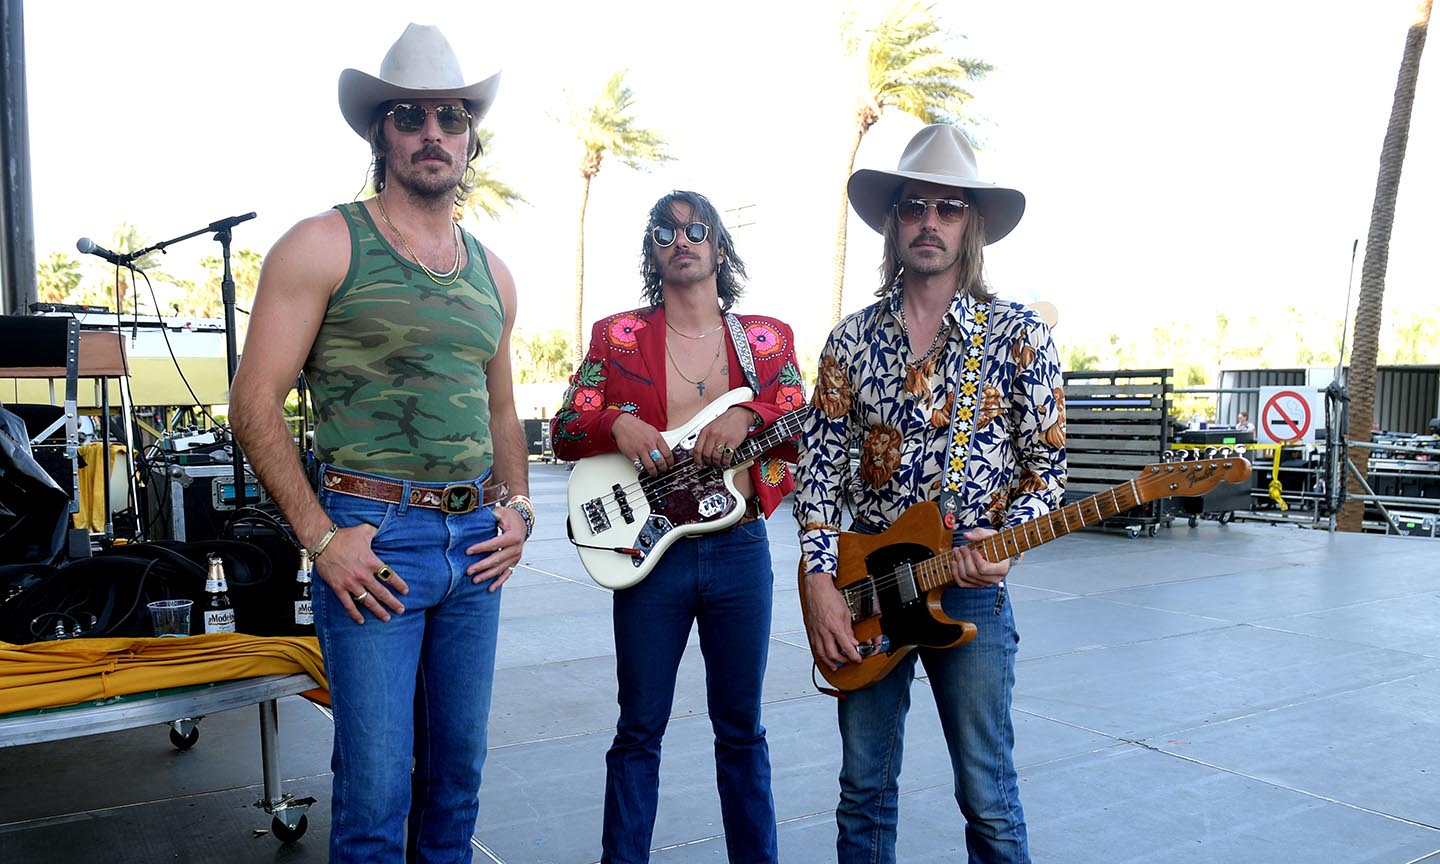 Midland Announces ‘The Last Resort Greetings From’ Tour uDiscover